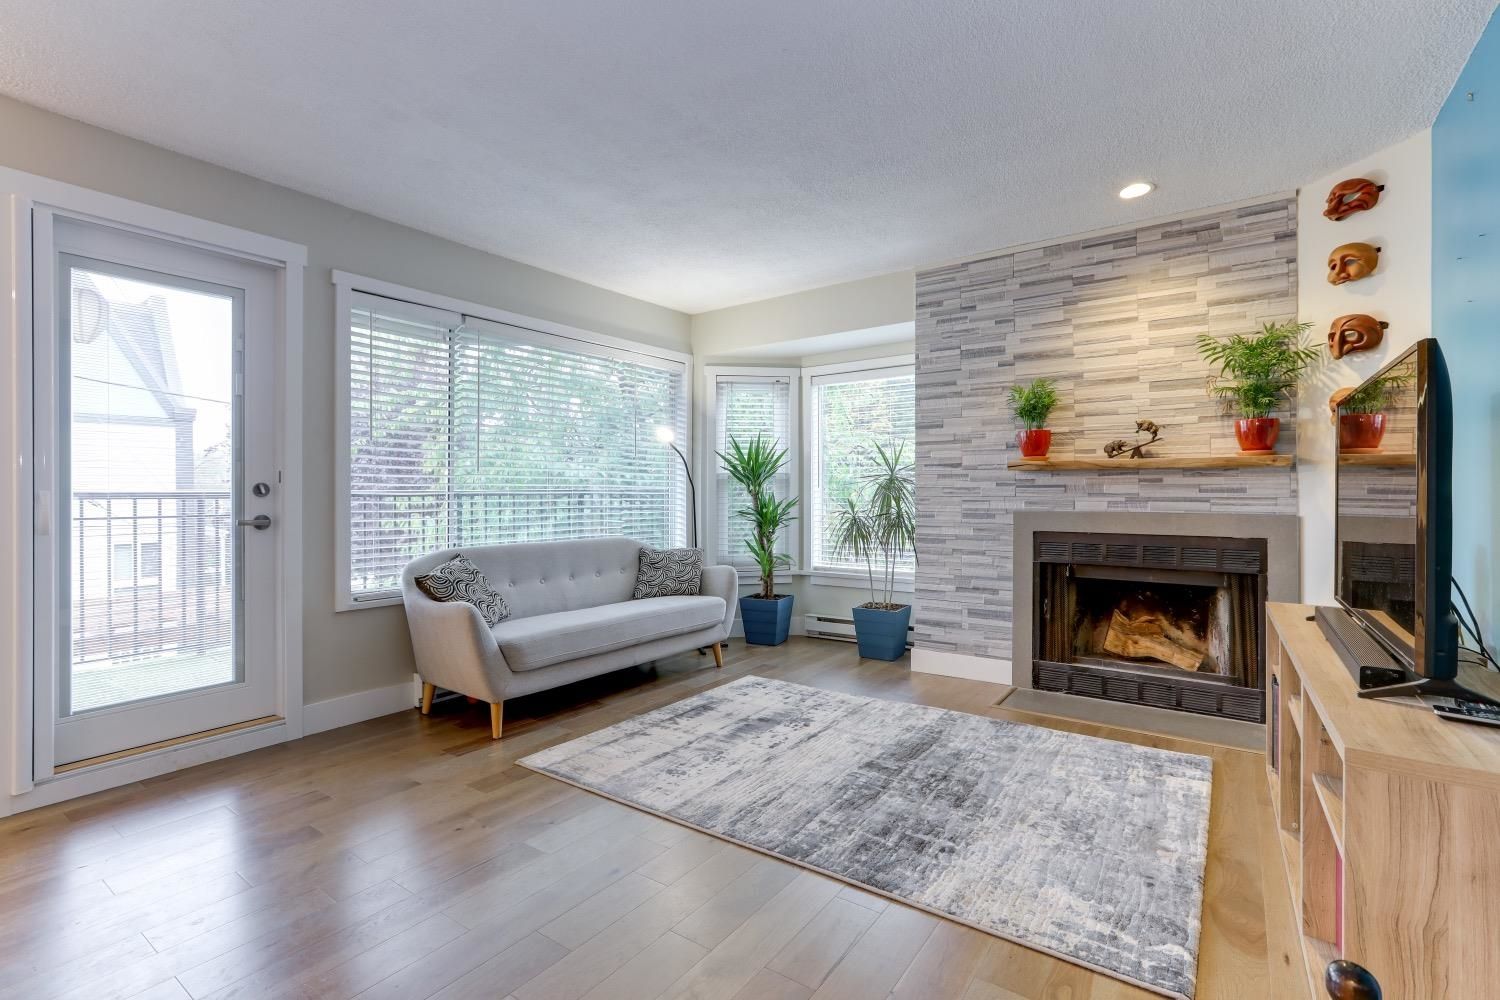 New property listed in Marpole, Vancouver West